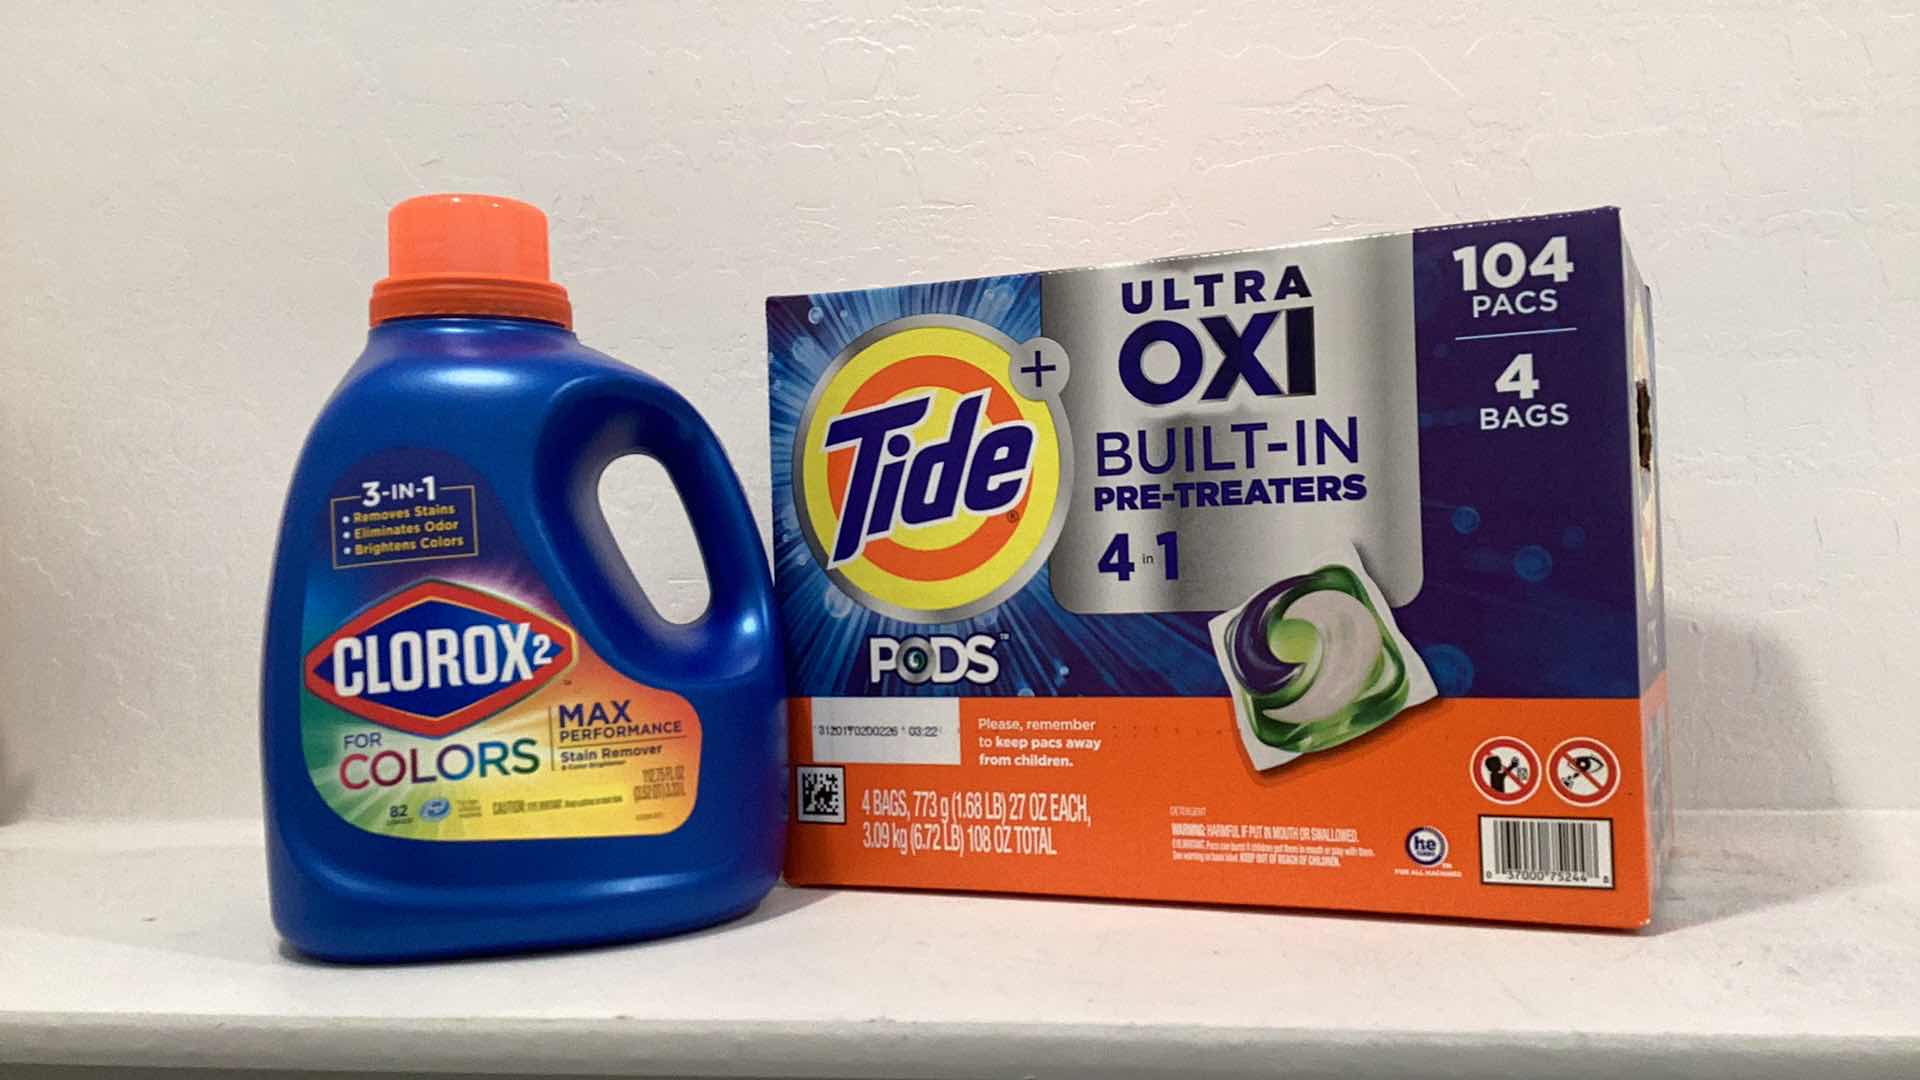 Photo 1 of CLOROX LAUNDRY DETERGENT LASTING FOR 82 LOADS AND TIDE PODS WITH 104 PACKS.